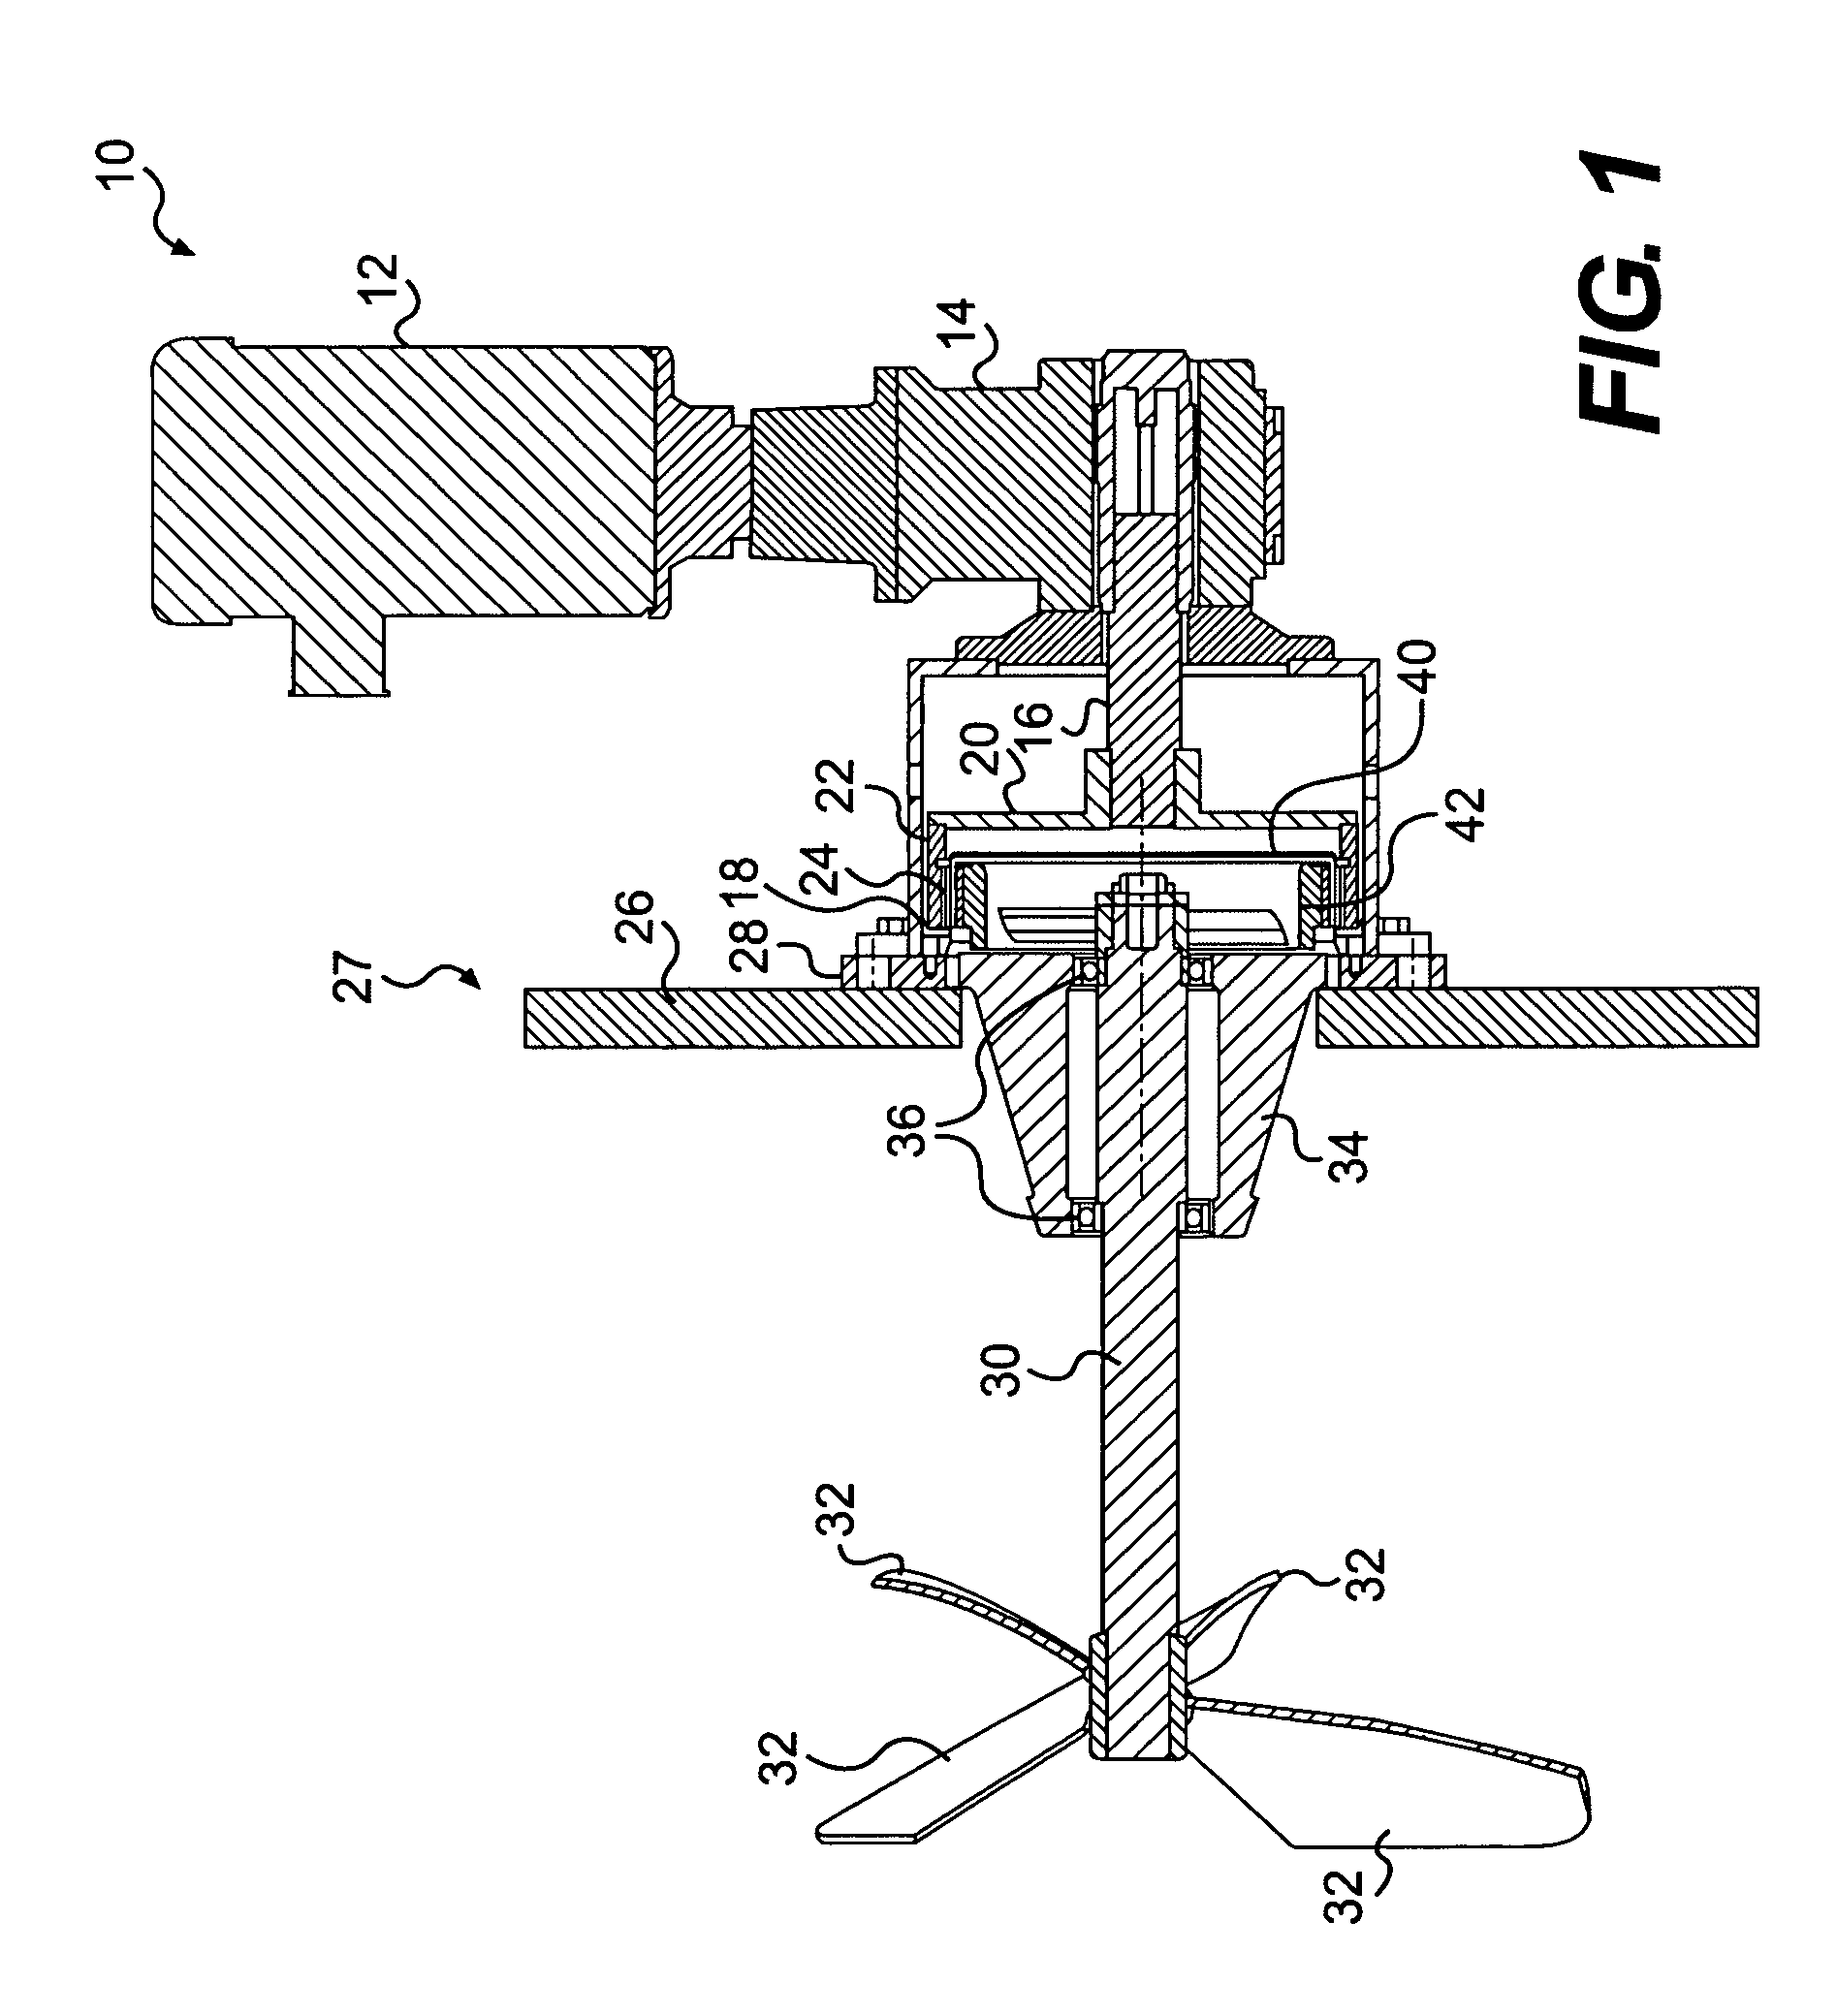 Magnetic mixer drive system and method